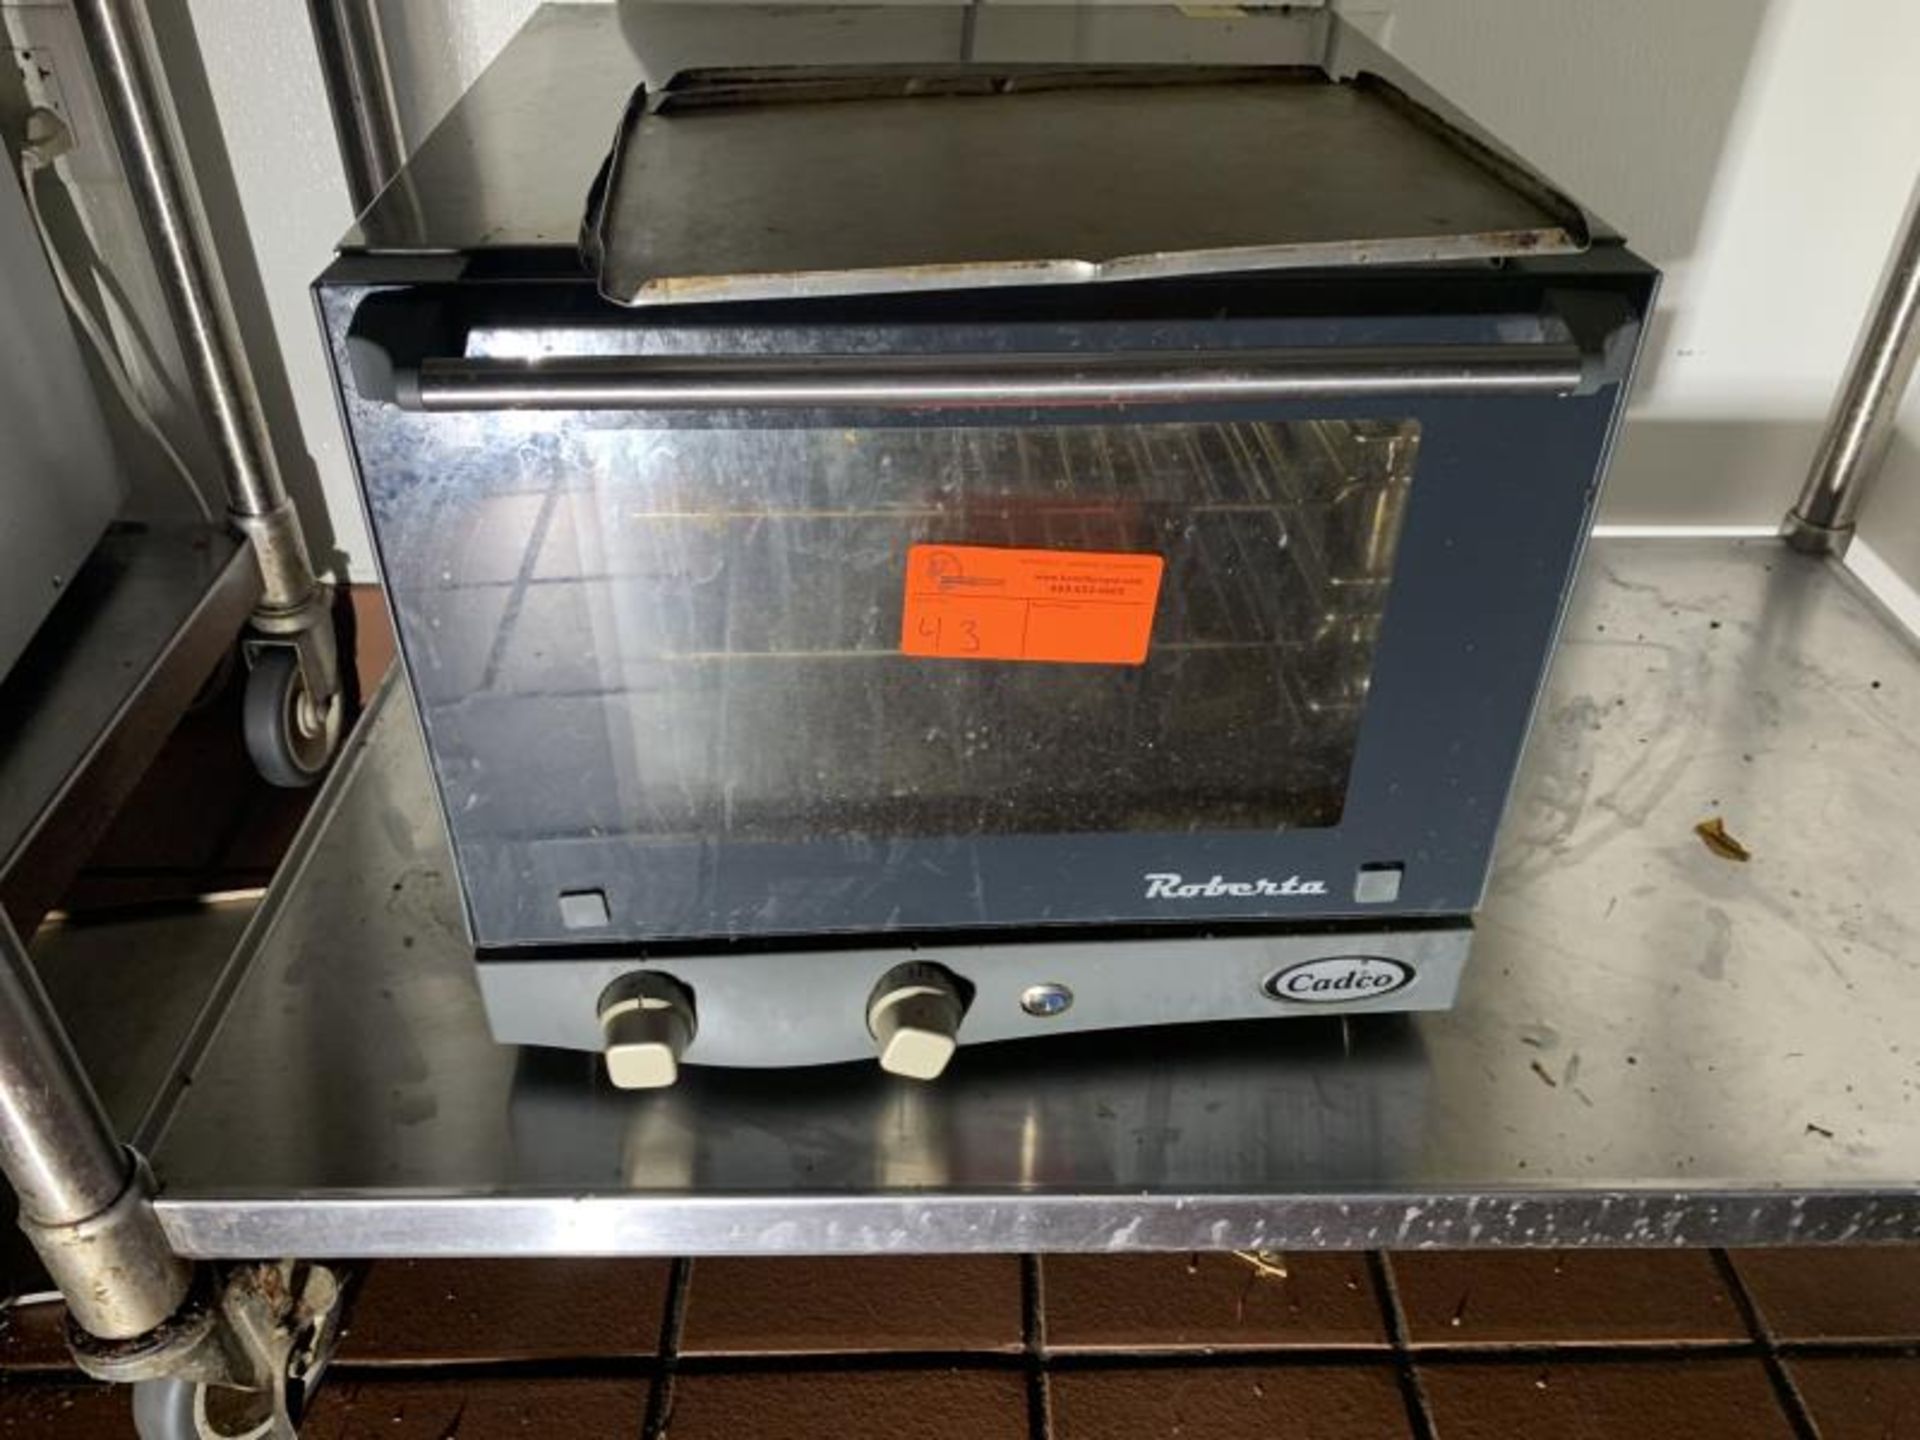 Cadco Roberta Electric Convection Oven, Model: